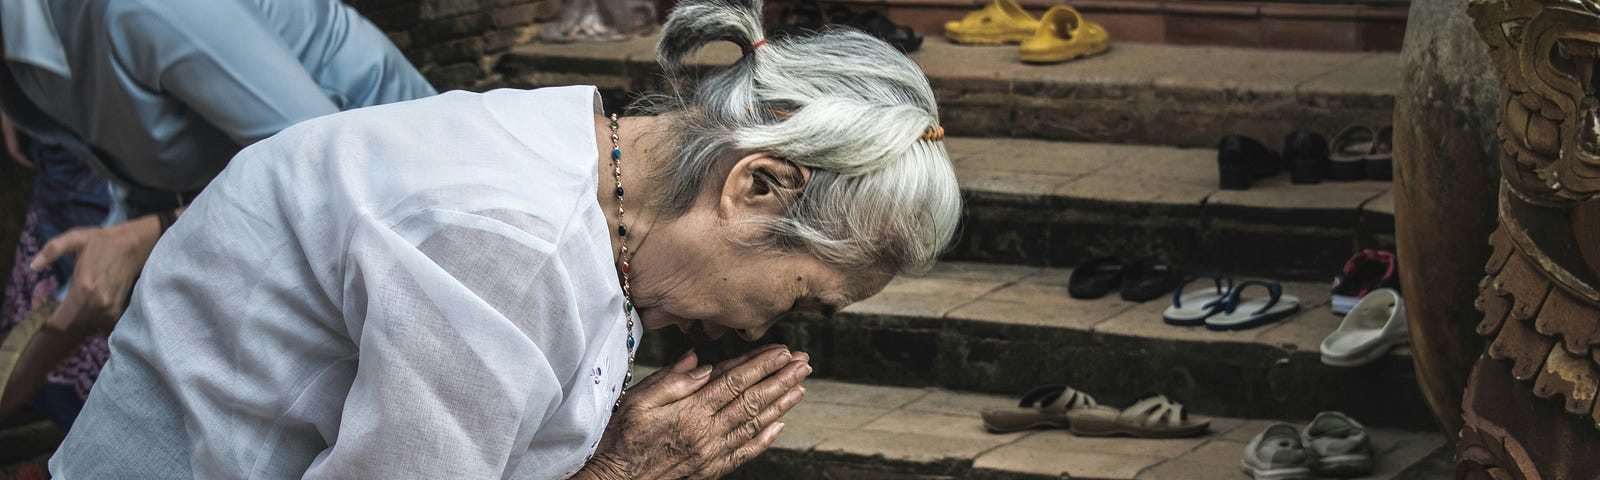 Woman bowing in prayer in a place of worship.